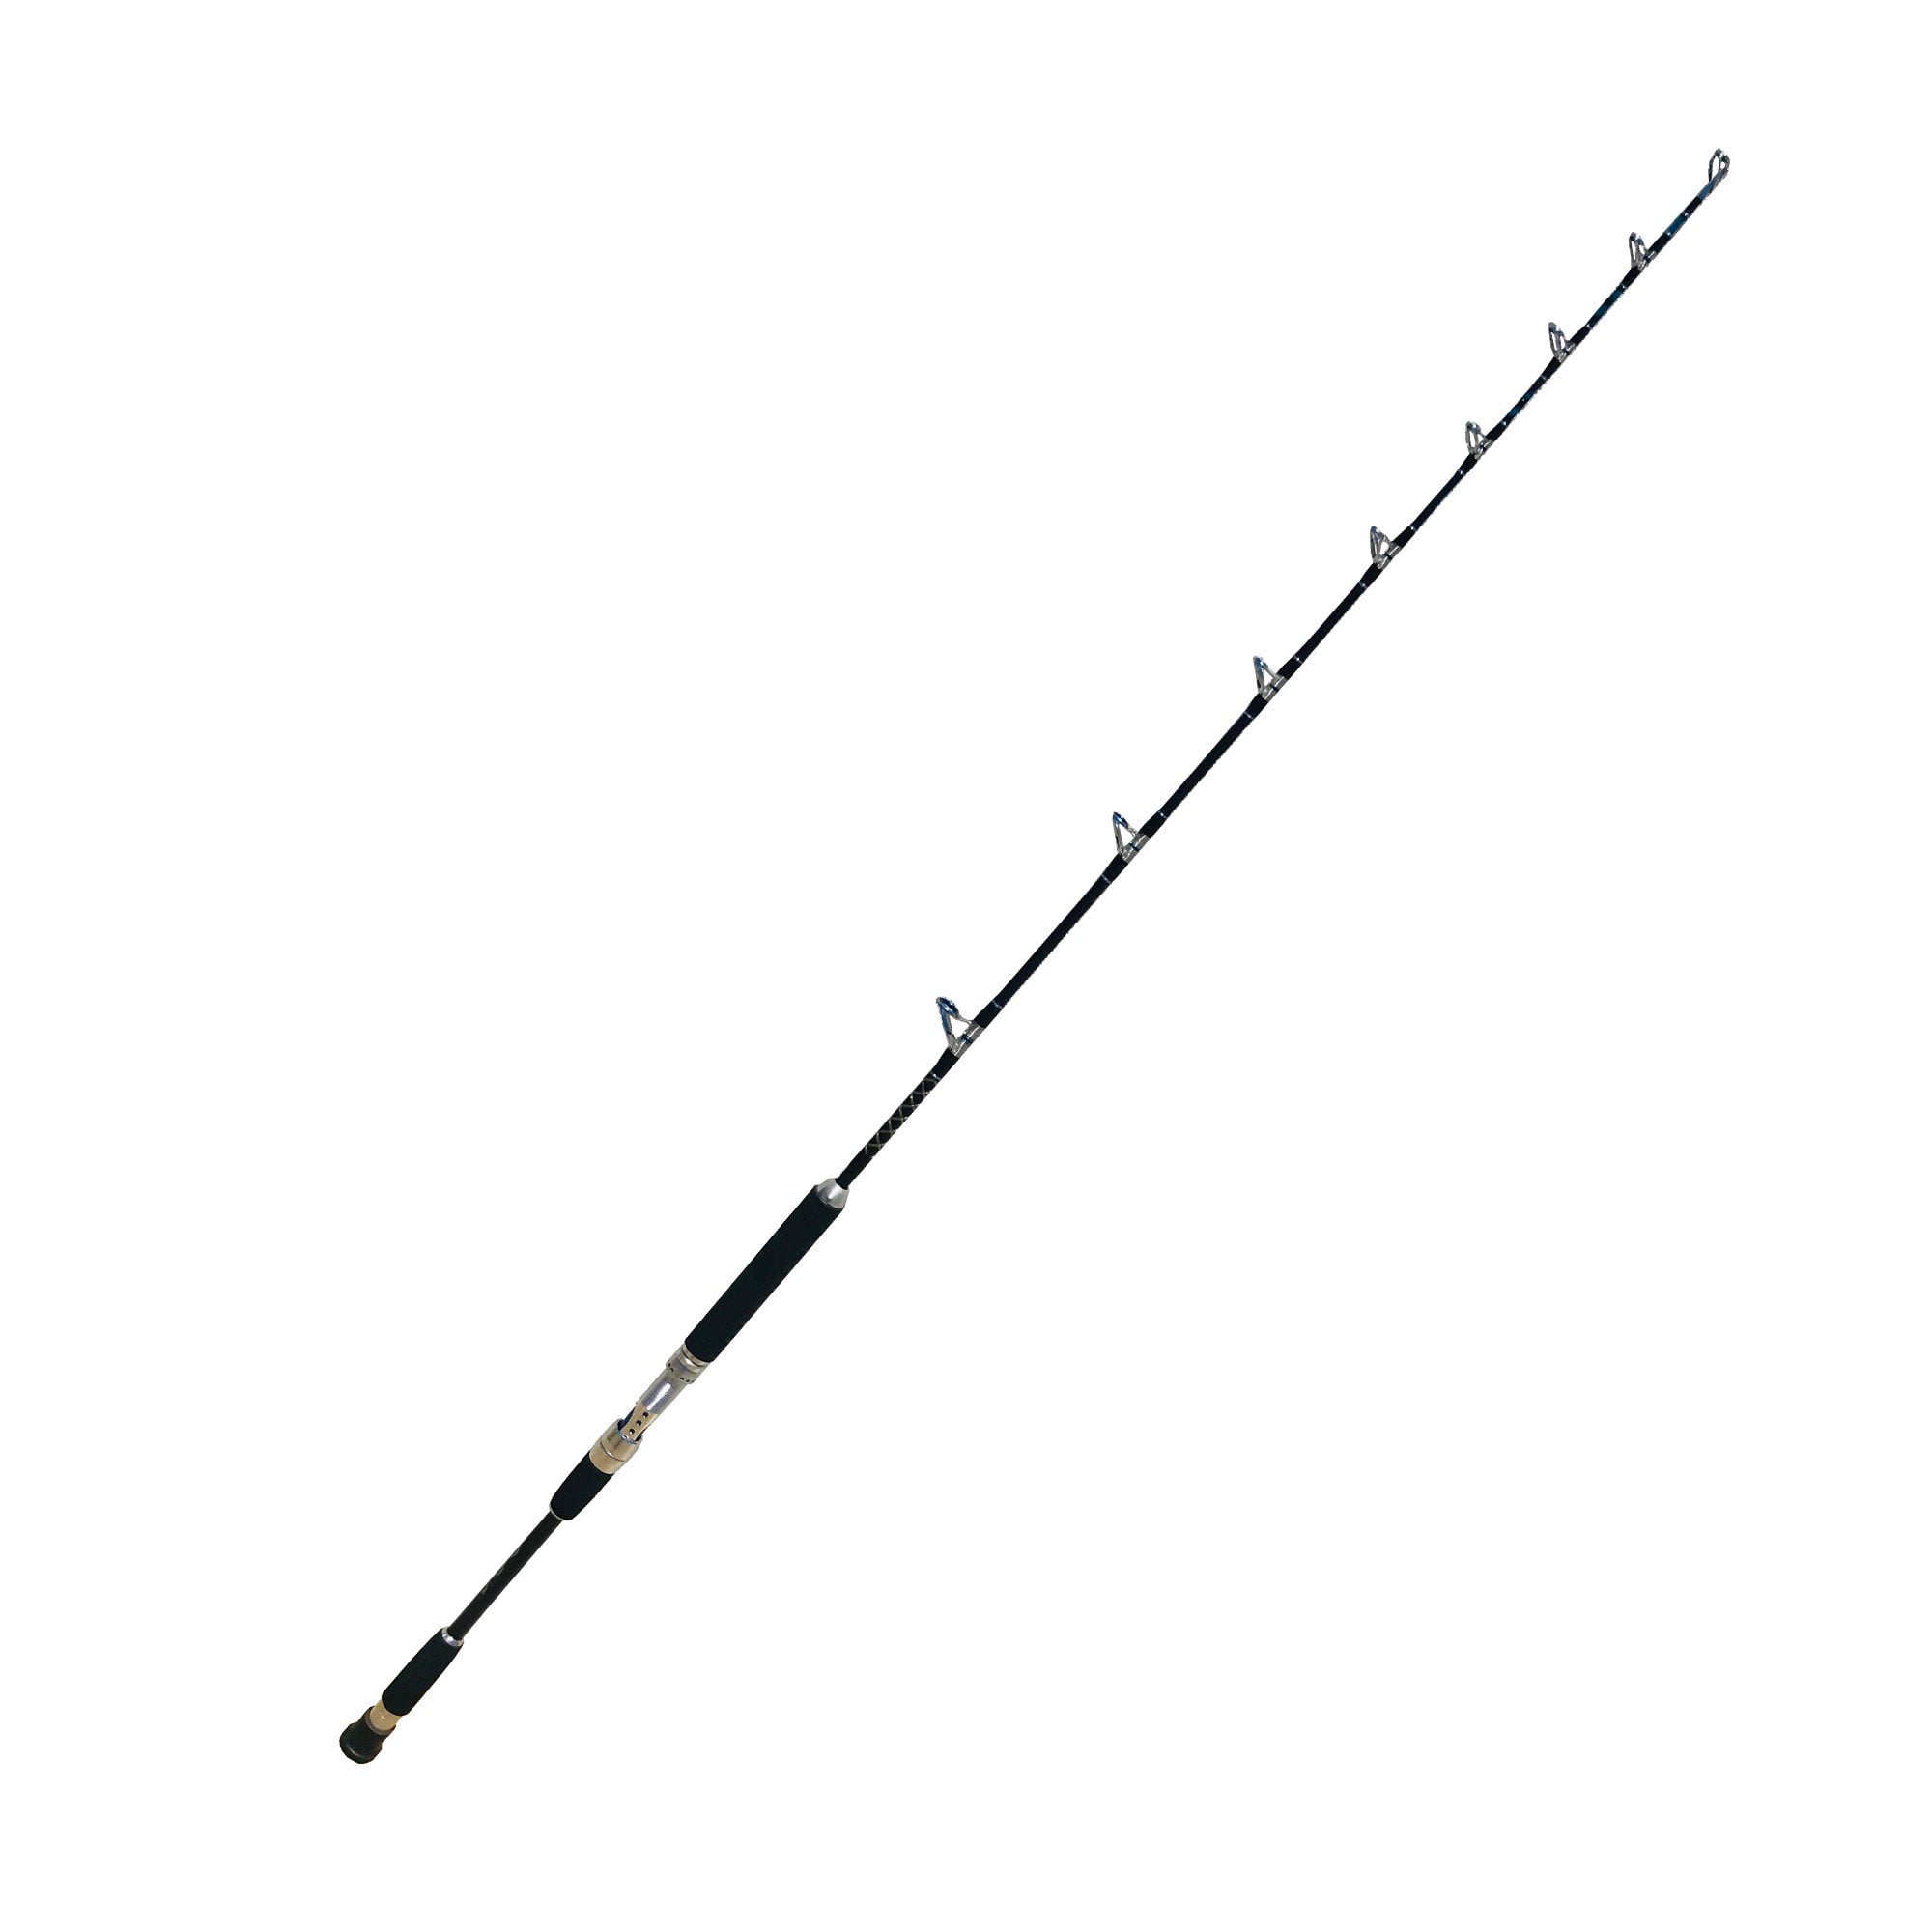 Sale for $19.99 New 20-40 LB Line Weight 2-pc 10' Surf Rod 